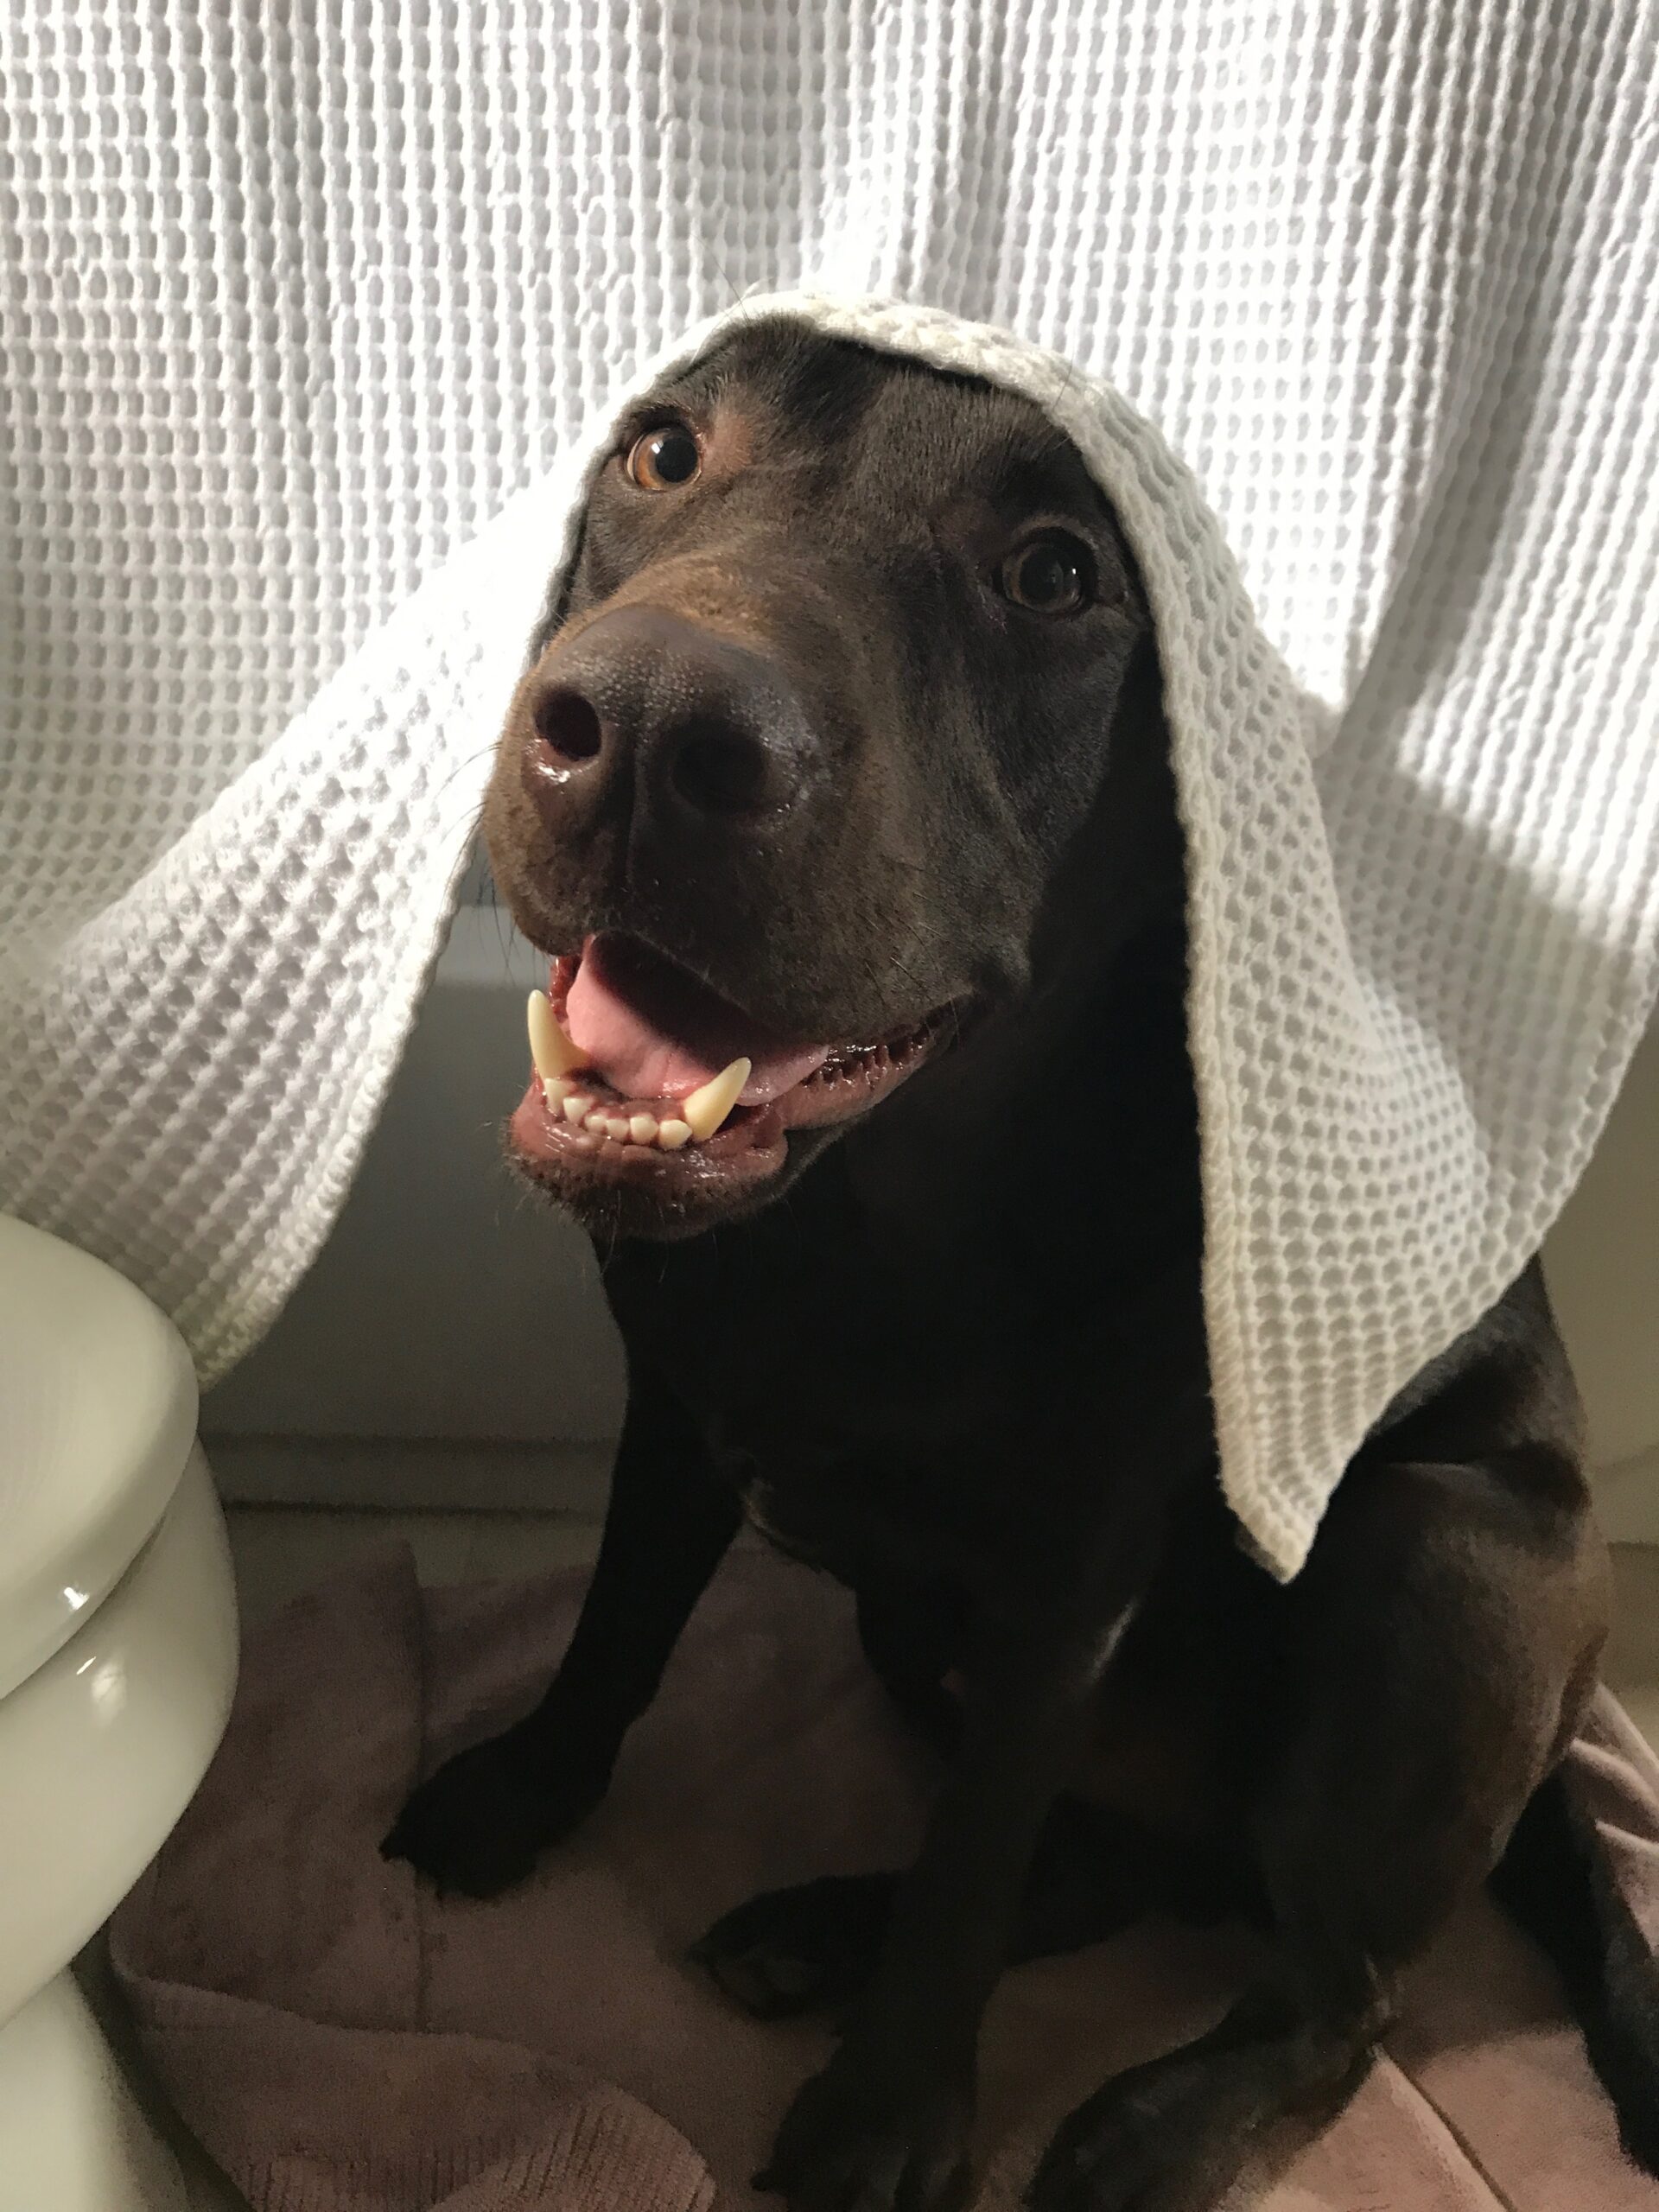 Photos Of Our Chocolate Labs That Make Me Laugh - What is better than funny dog photos? Here are some of my very favorites of our Chocolate Labradors! | Funny Dog Photos | Chocolate Labrador Retriever | Chocolate Lab Puppies